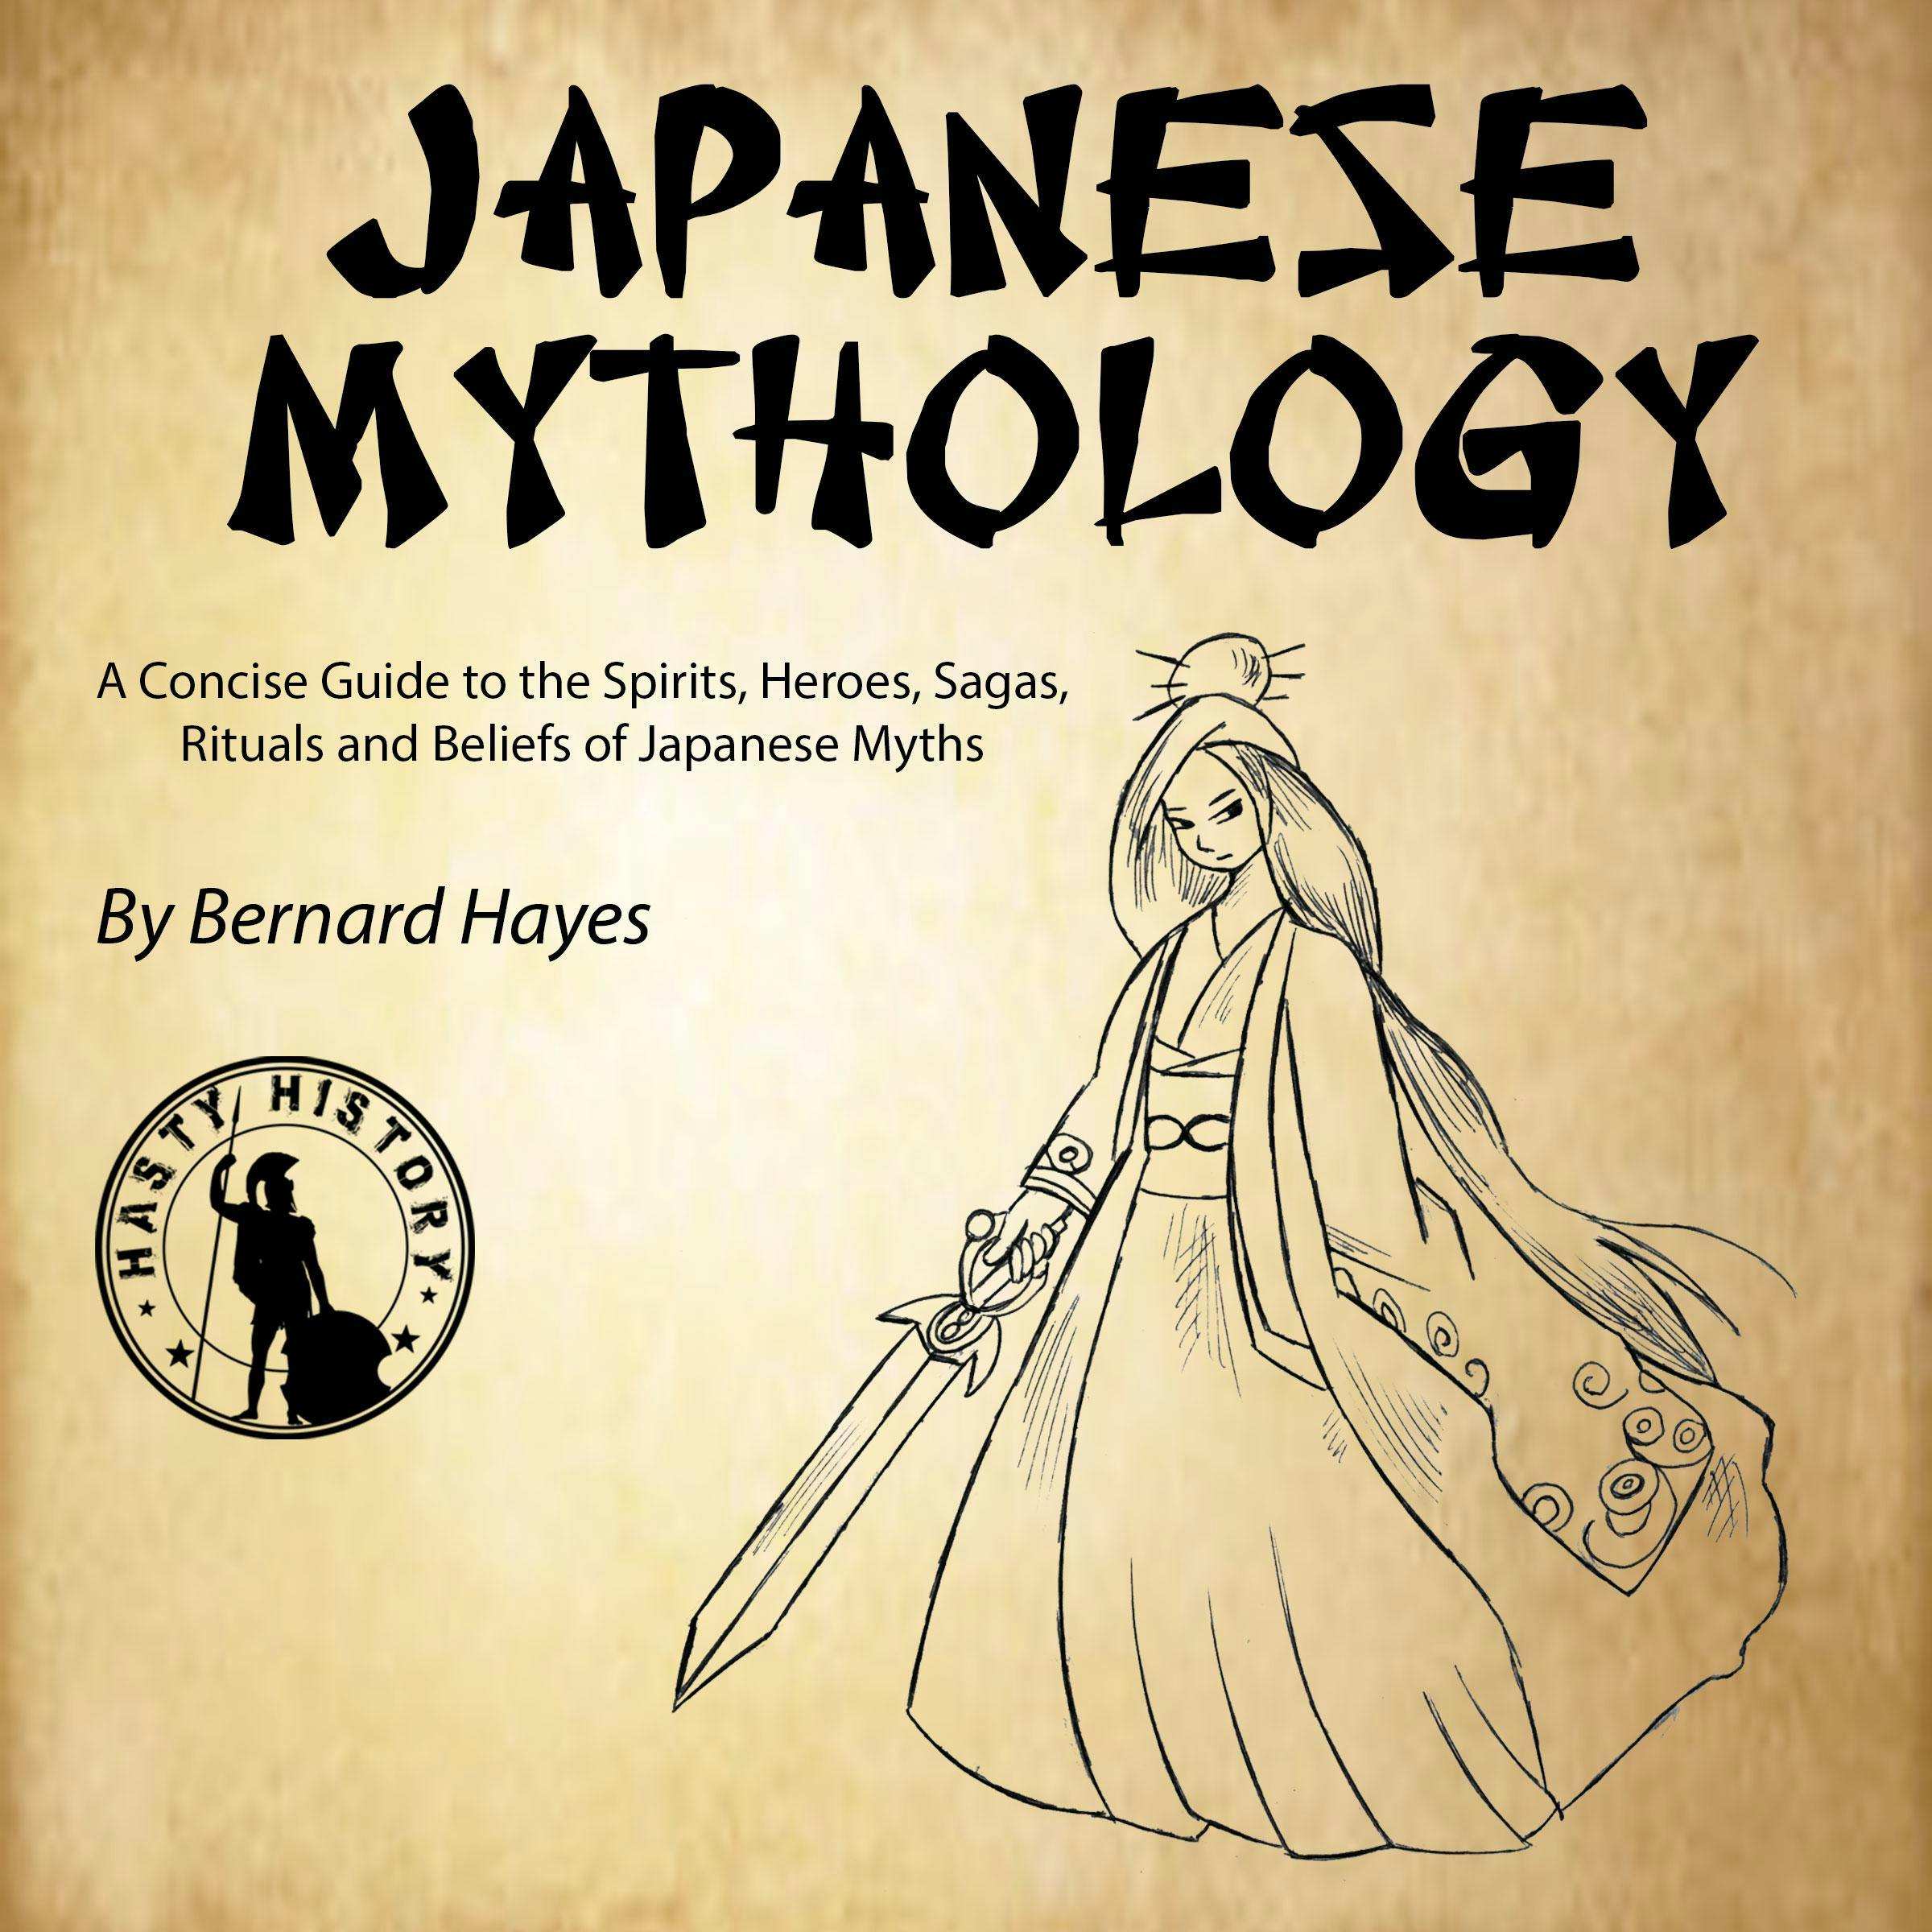 Japanese Mythology: A Concise Guide to the Gods, Heroes, Sagas, Rituals and Beliefs of Japanese Myths - Bernard Hayes